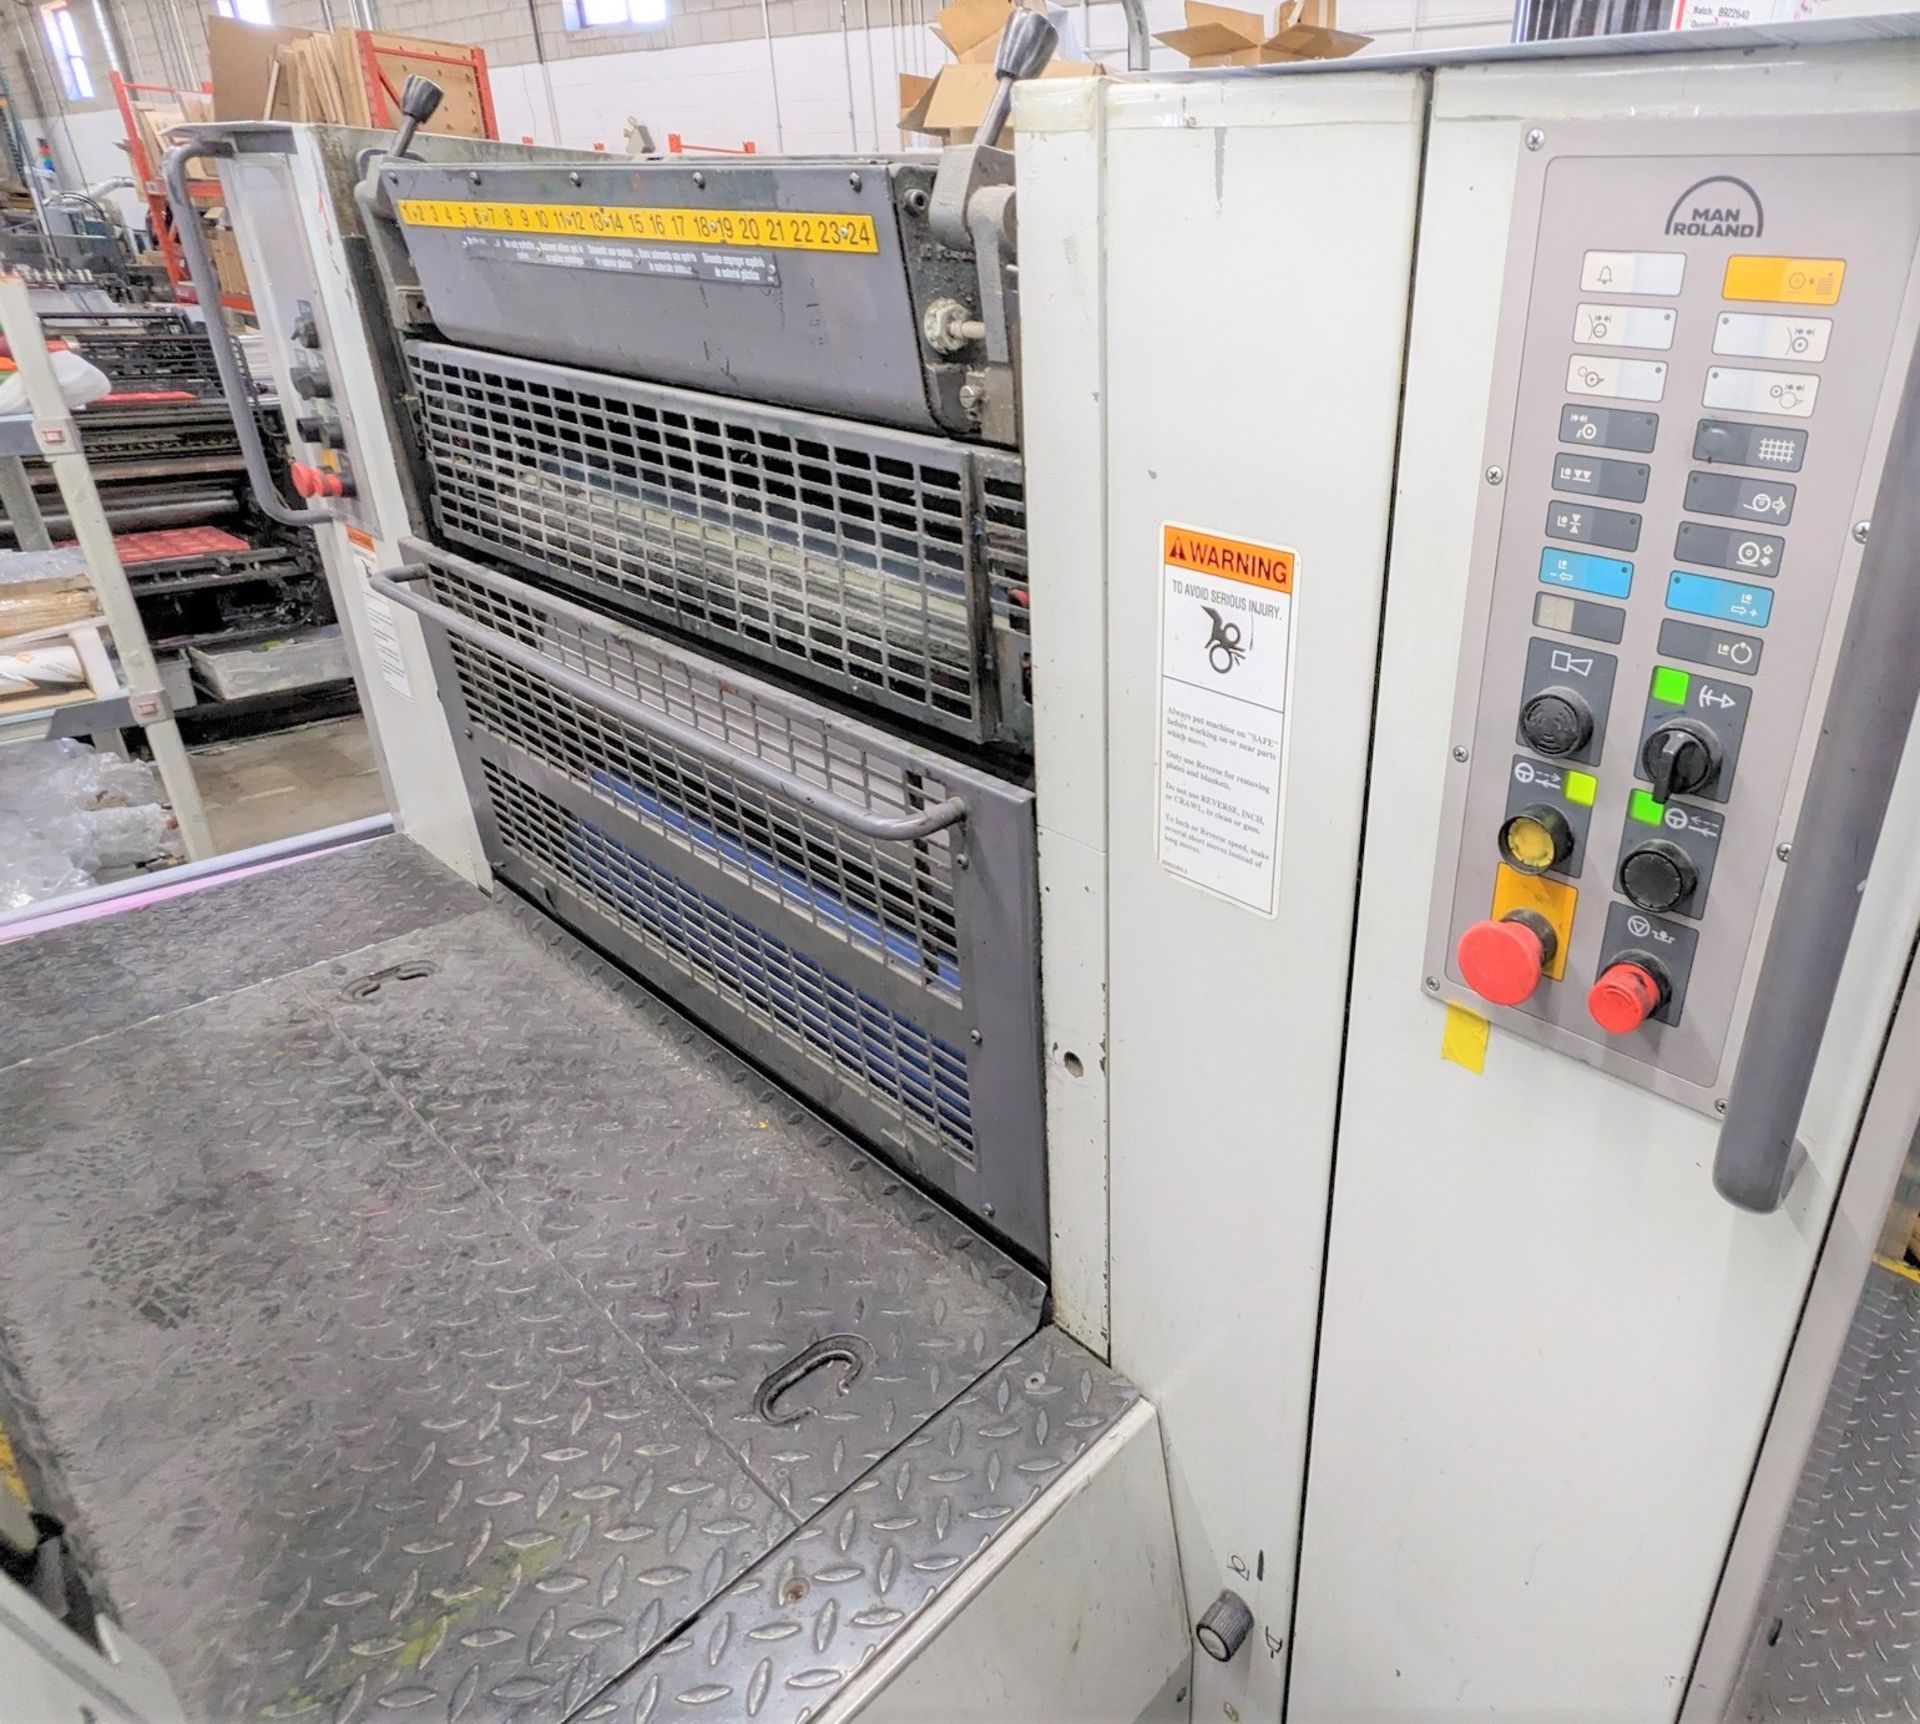 1995 MAN ROLAND 300 6-COLOUR OFFSET PRINTING PRESS, MODEL R306, S/N 25152B, TOTAL SHEET COUNT - Image 35 of 53